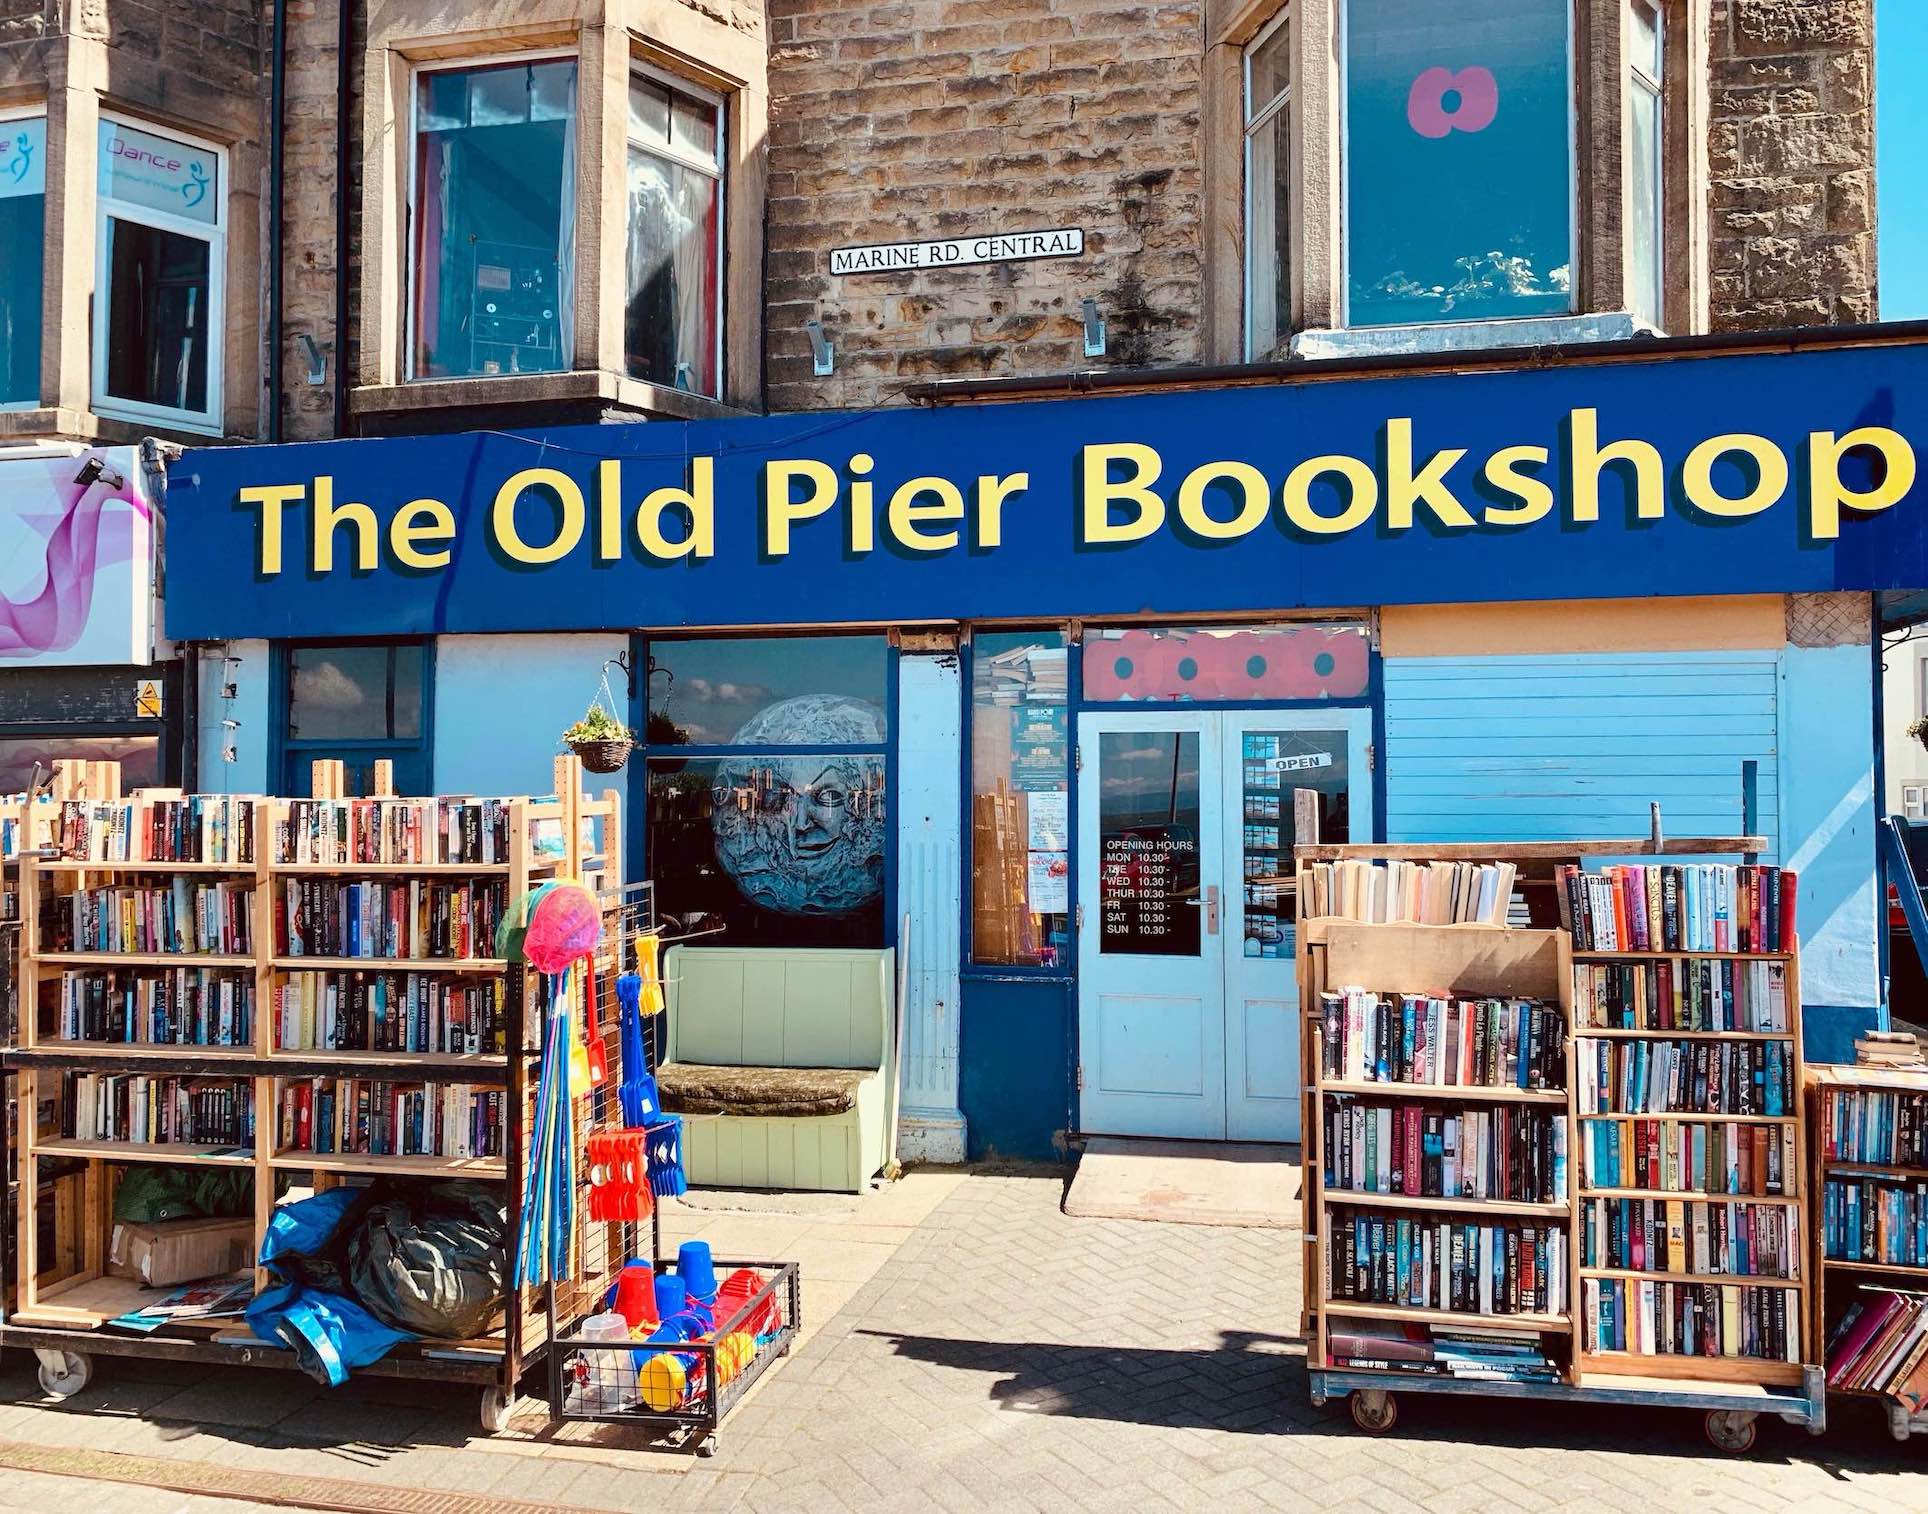 The Old Pier Bookshop Morecambe.